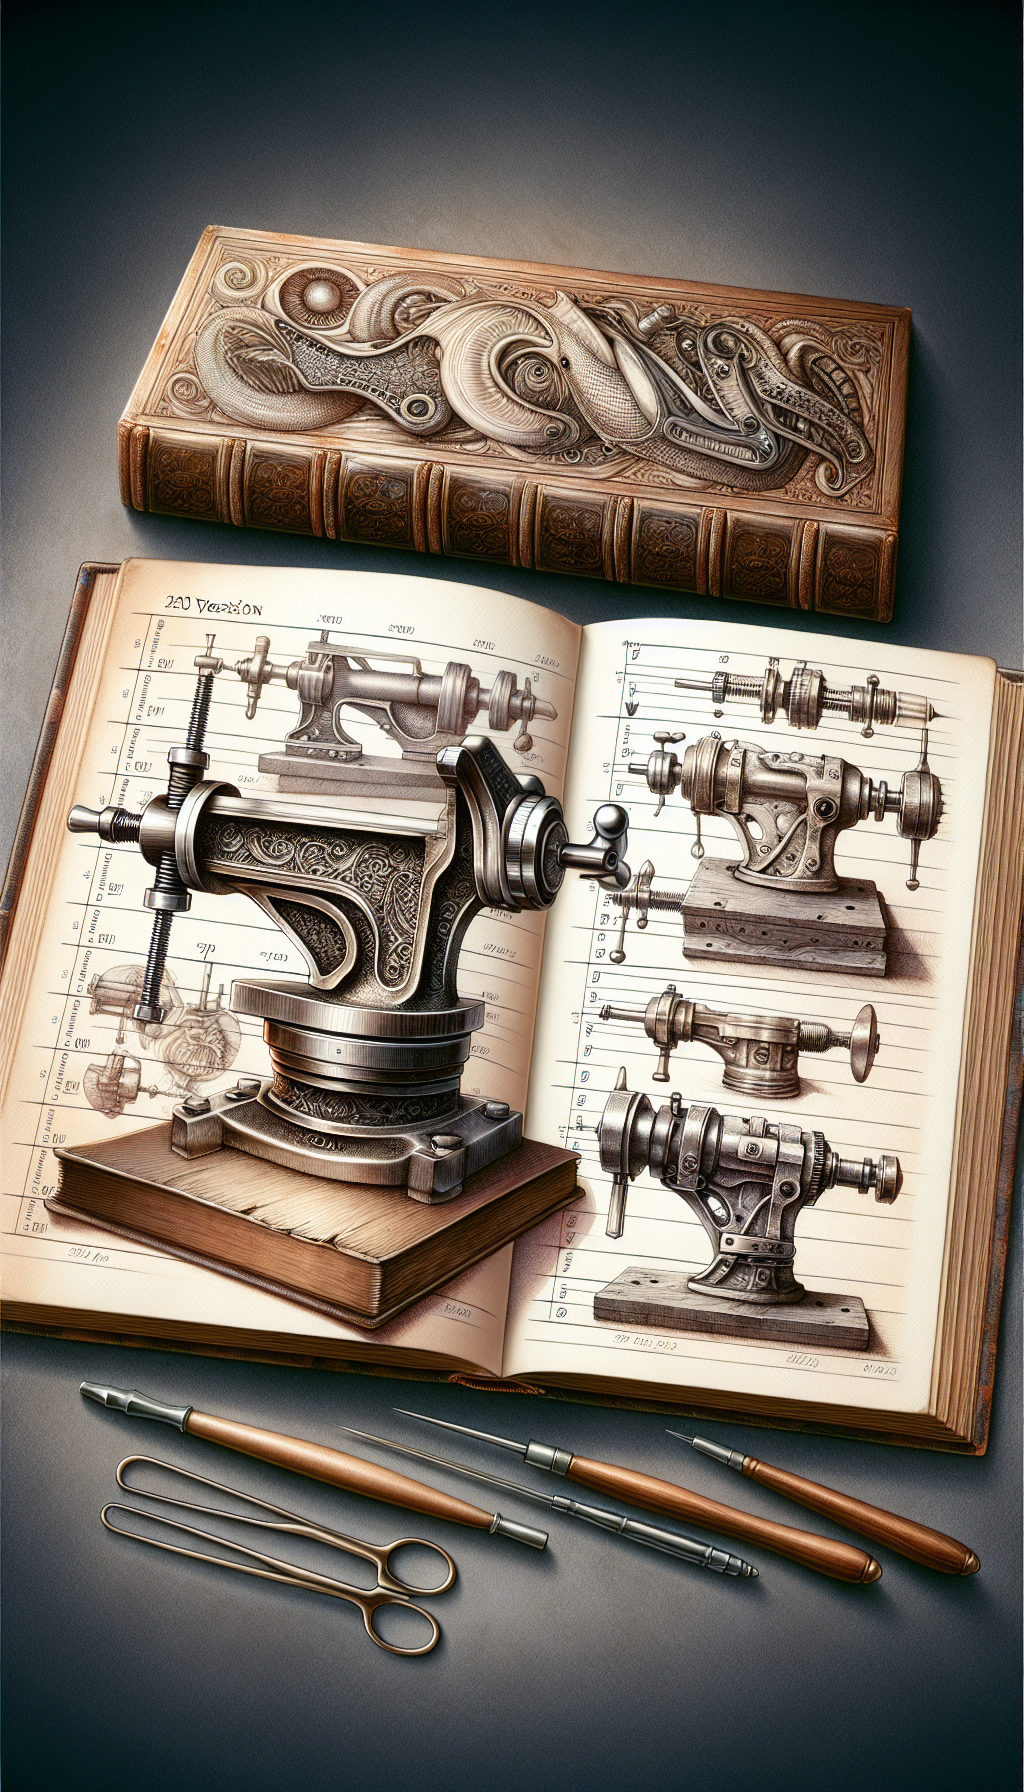 An image of an aged, ornate vise grasping an open book, its pages inscribed with the timeline of hallmark features specific to historic vises; the illustration seamlessly blends styles, with the vise depicted in hyper-realism against a watercolor backdrop, while the book's timeline features delicate line art to represent different eras of vises, emphasizing the evolution and identification process.